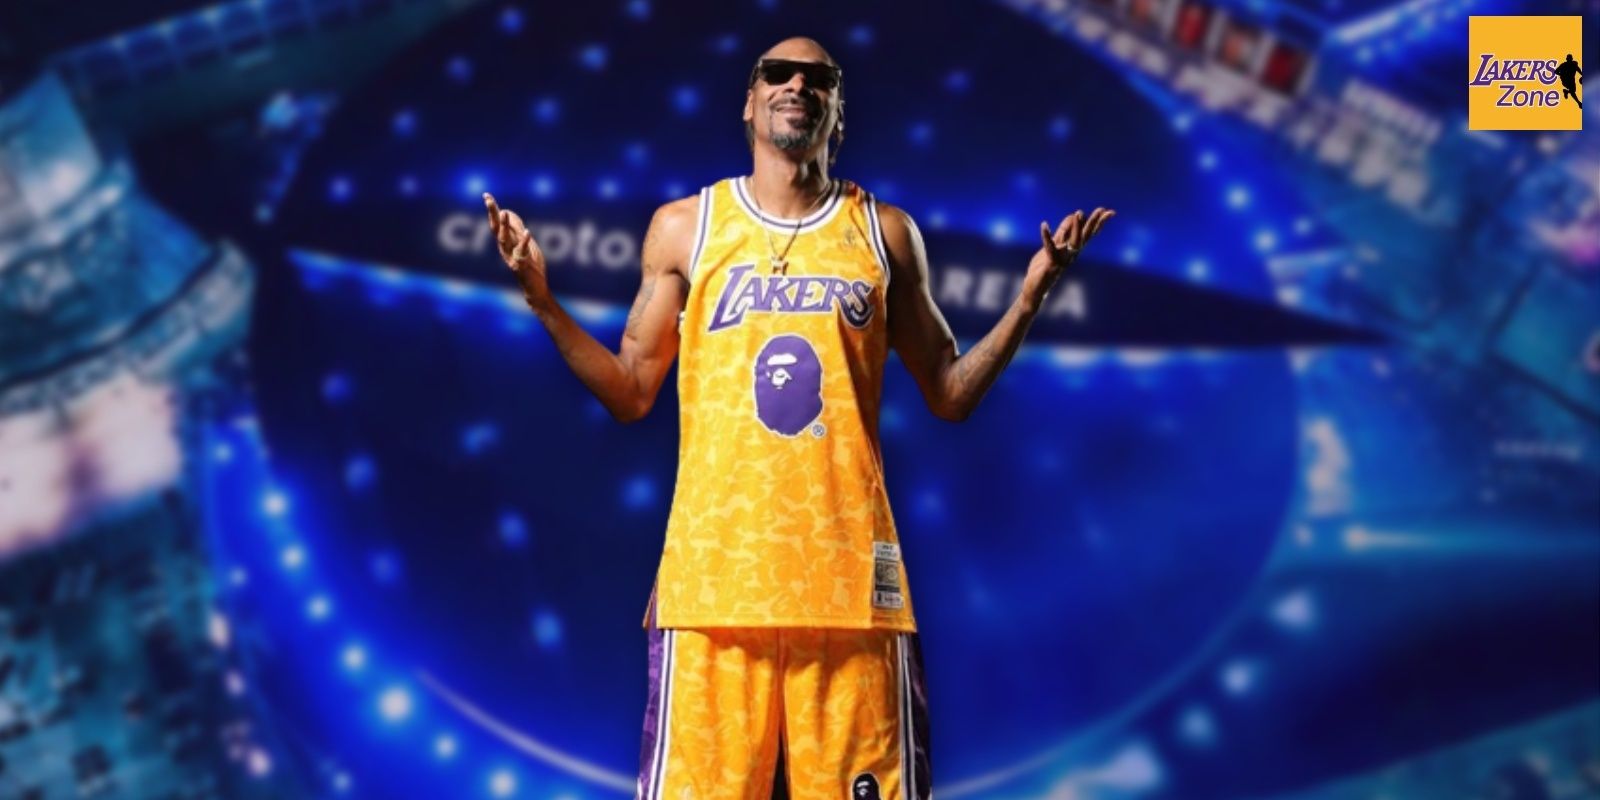 Boy we cold,' latest Snoop Dogg statement that Lakers fans aren't liking